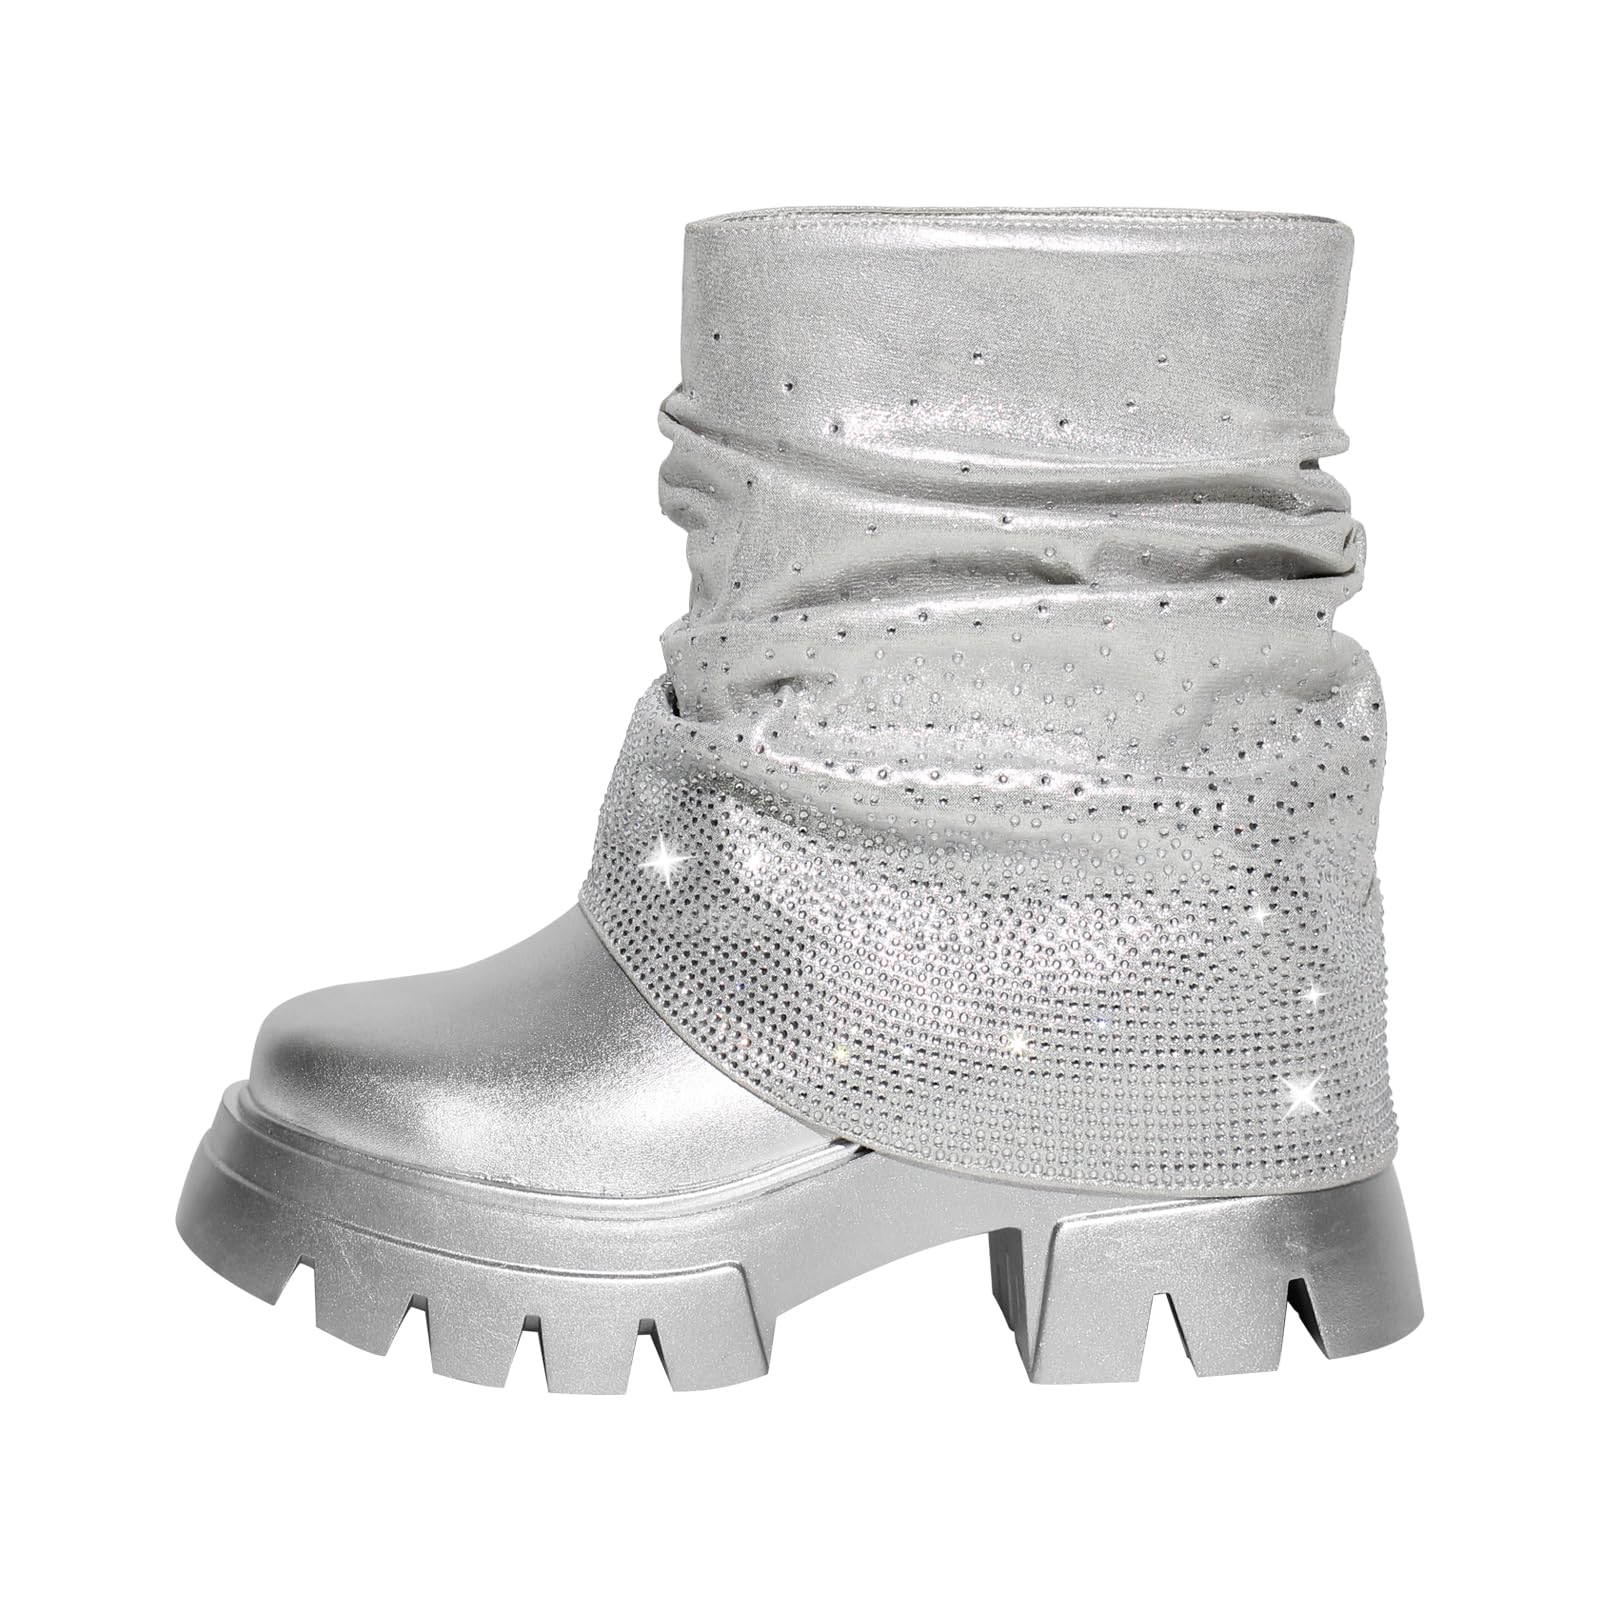 TAAFO Sliver Rhinestone Fold Over Boots Flats Platform Ankle Boots Dress Party Shoes Women Boots